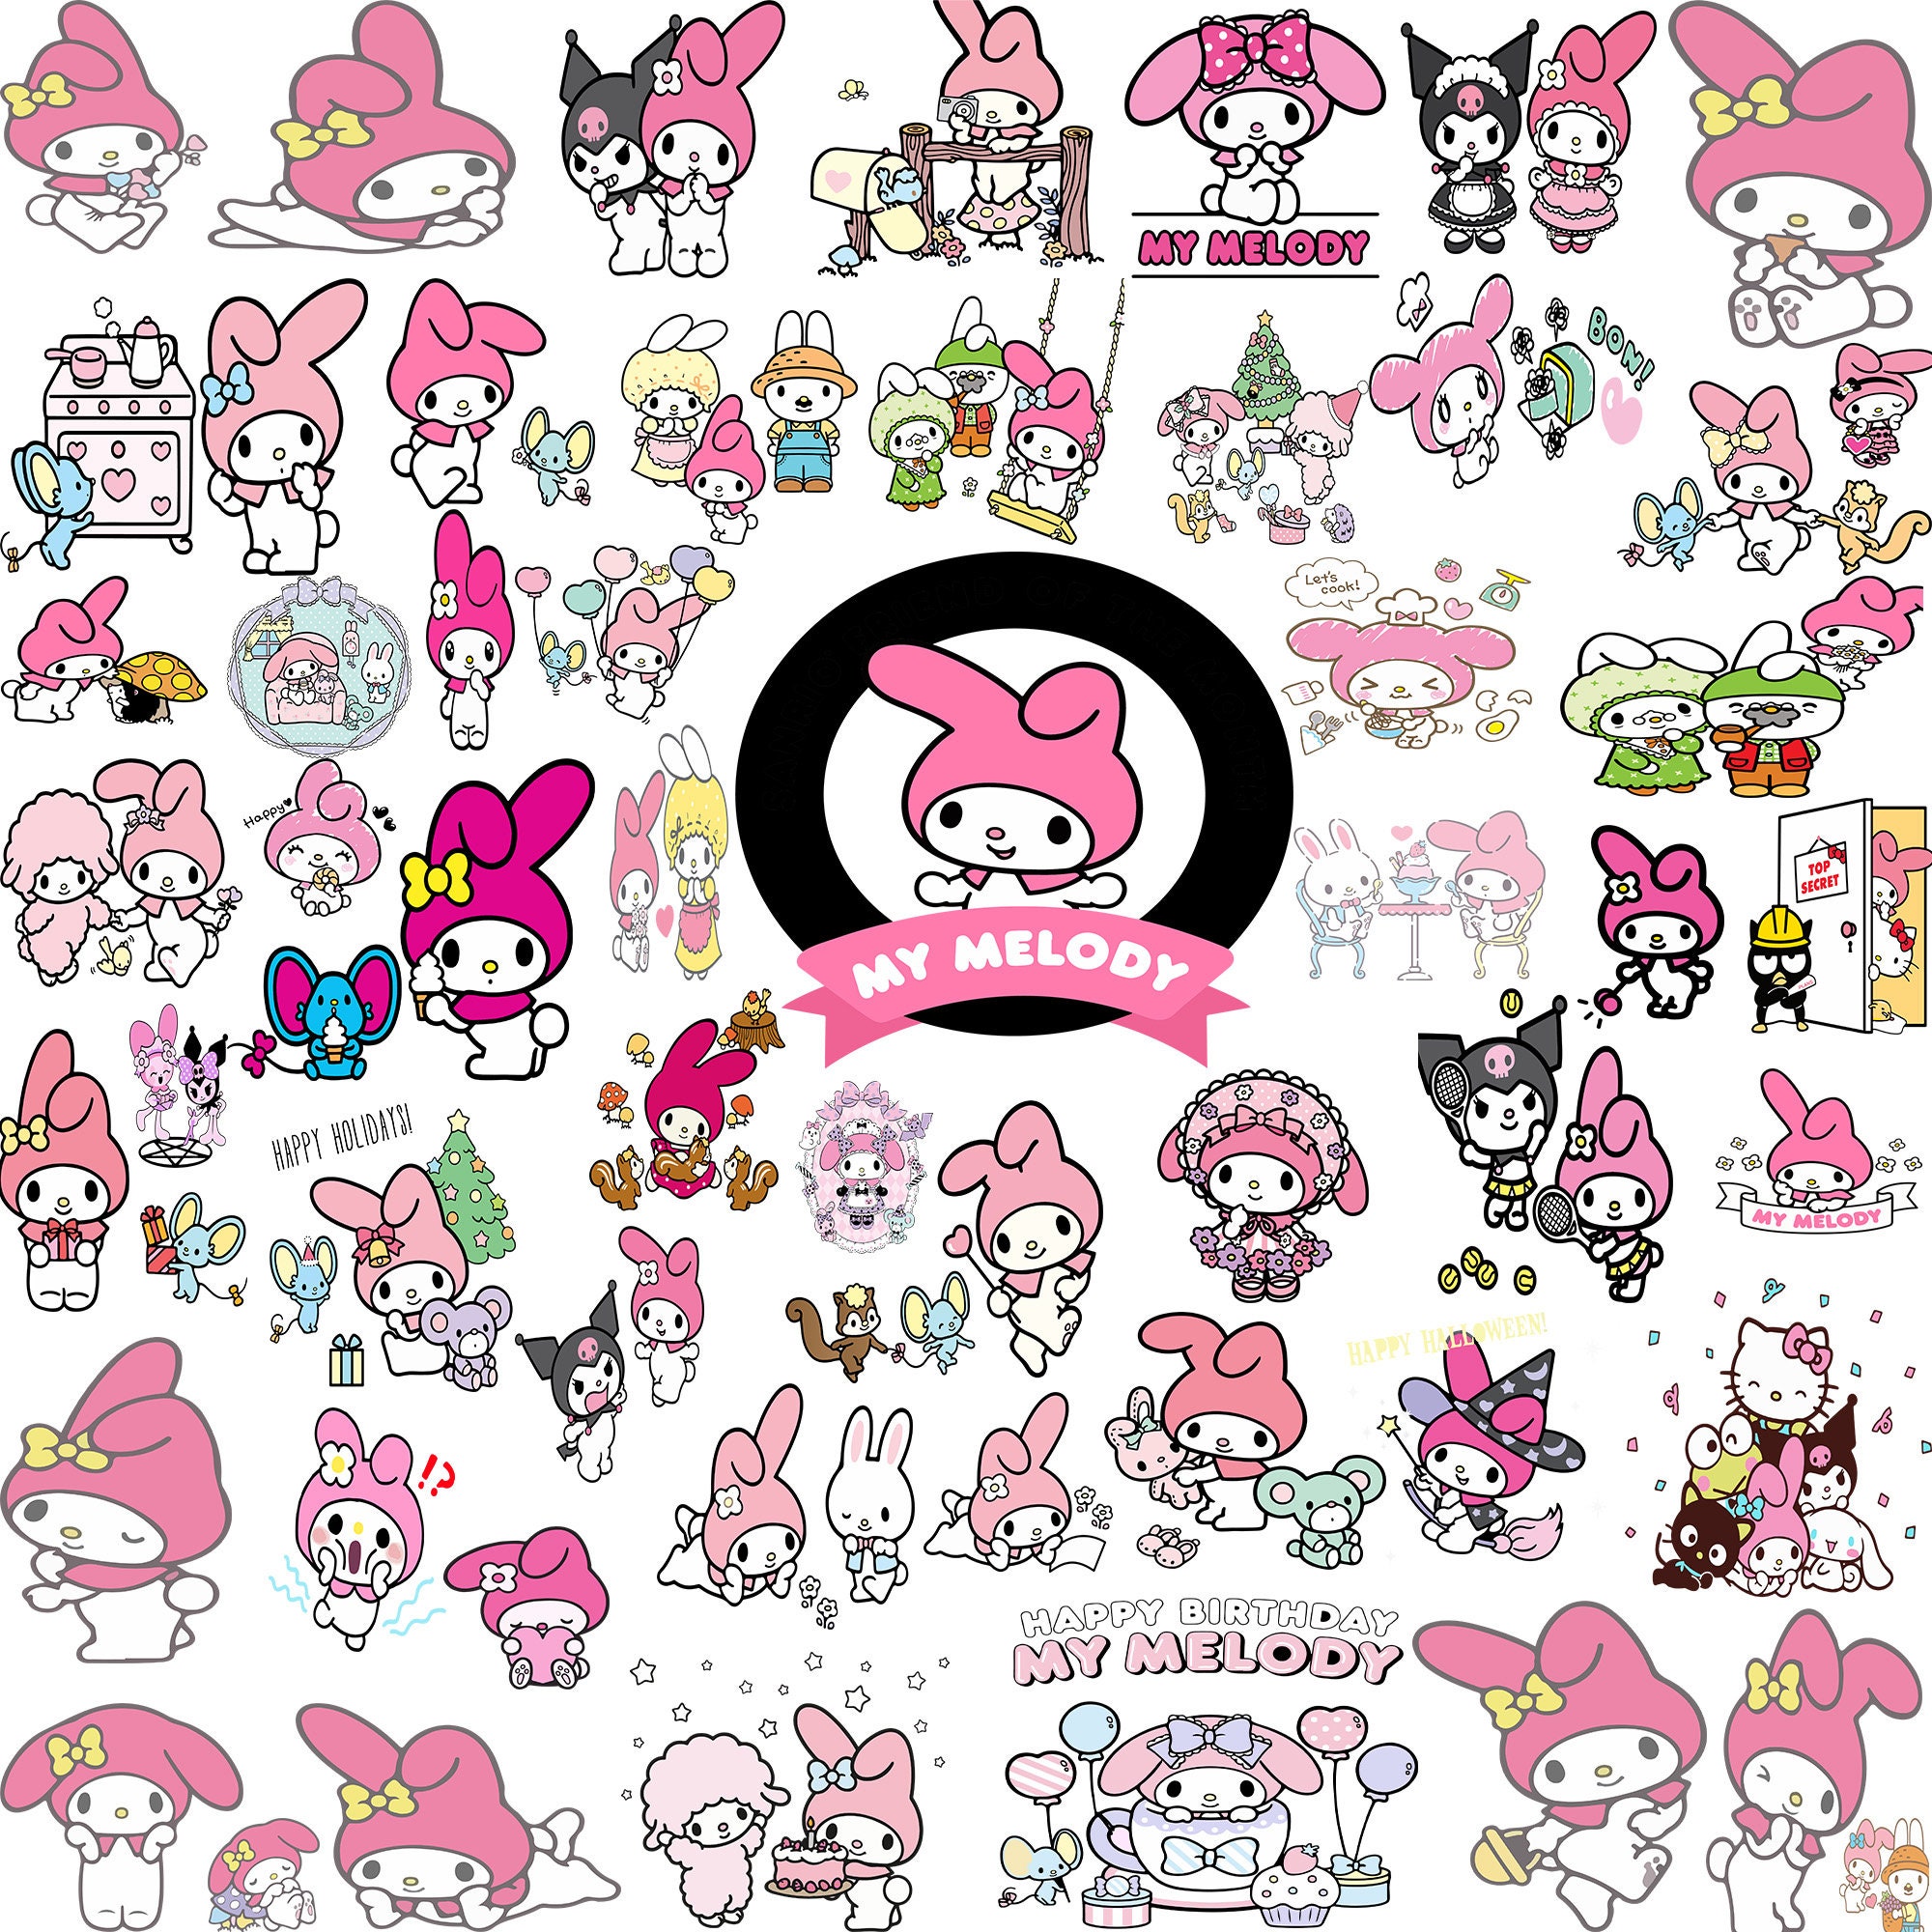 My Melody & KUROMI Plush Doll!  Cute little drawings, Soft wallpaper,  Anime expressions